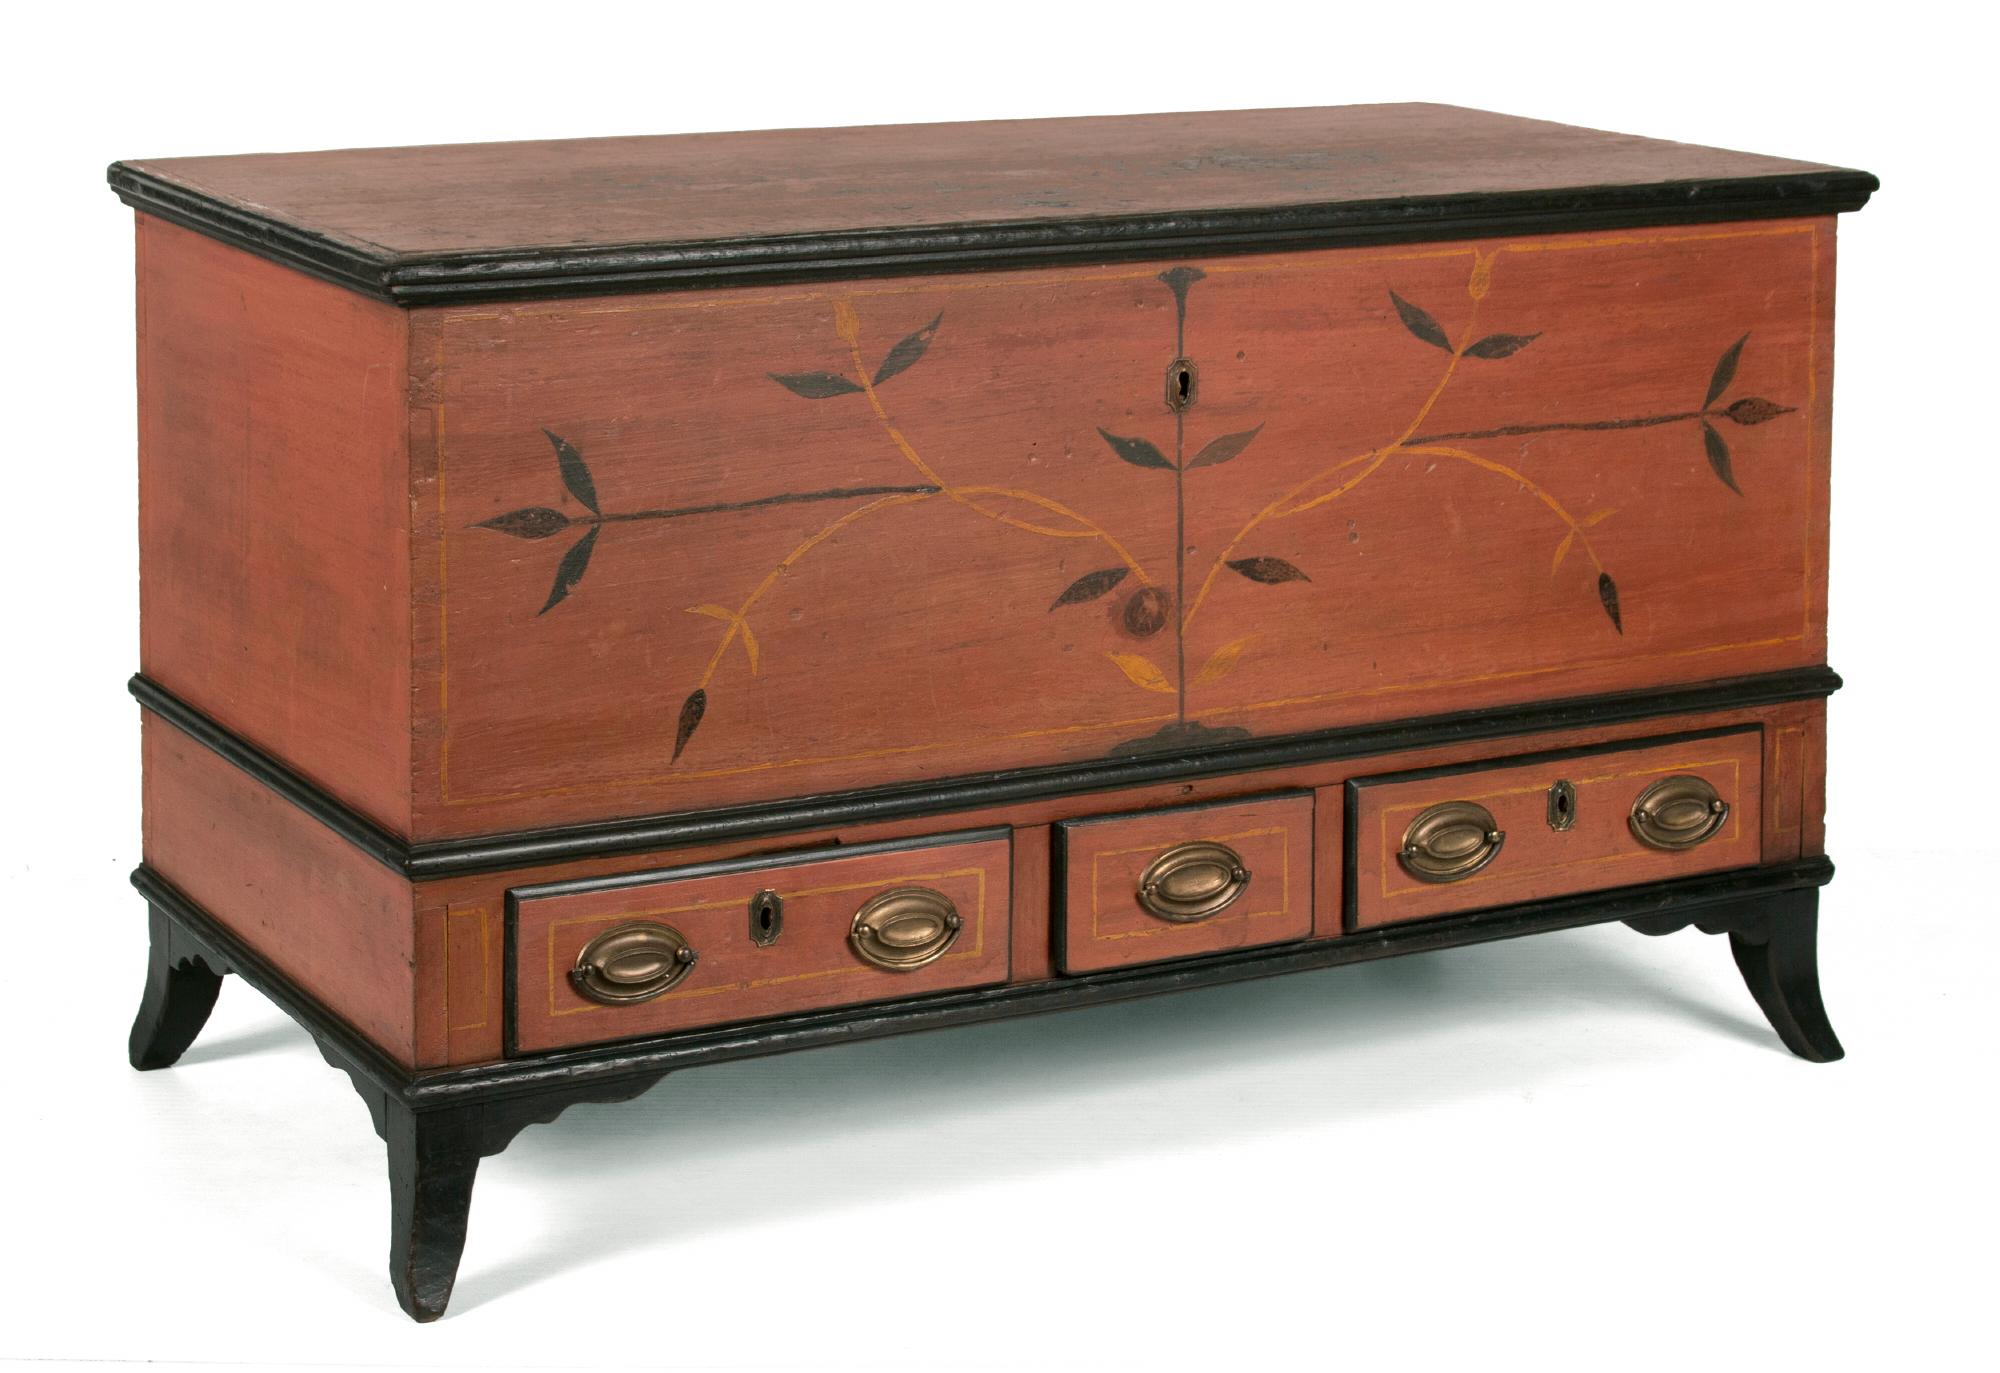 PAINTED, CENTRE COUNTY, PENNSYLVANIA BLANKET CHEST IN SALMON AND BLACK WITH FLORAL DECORATION, 3 DRAWERS, AND APPLIED, SPLAY FEET, circa 1815-1825

Salmon-painted Pennsylvania blanket chest with ebonized molding at the top, waist, and base, and